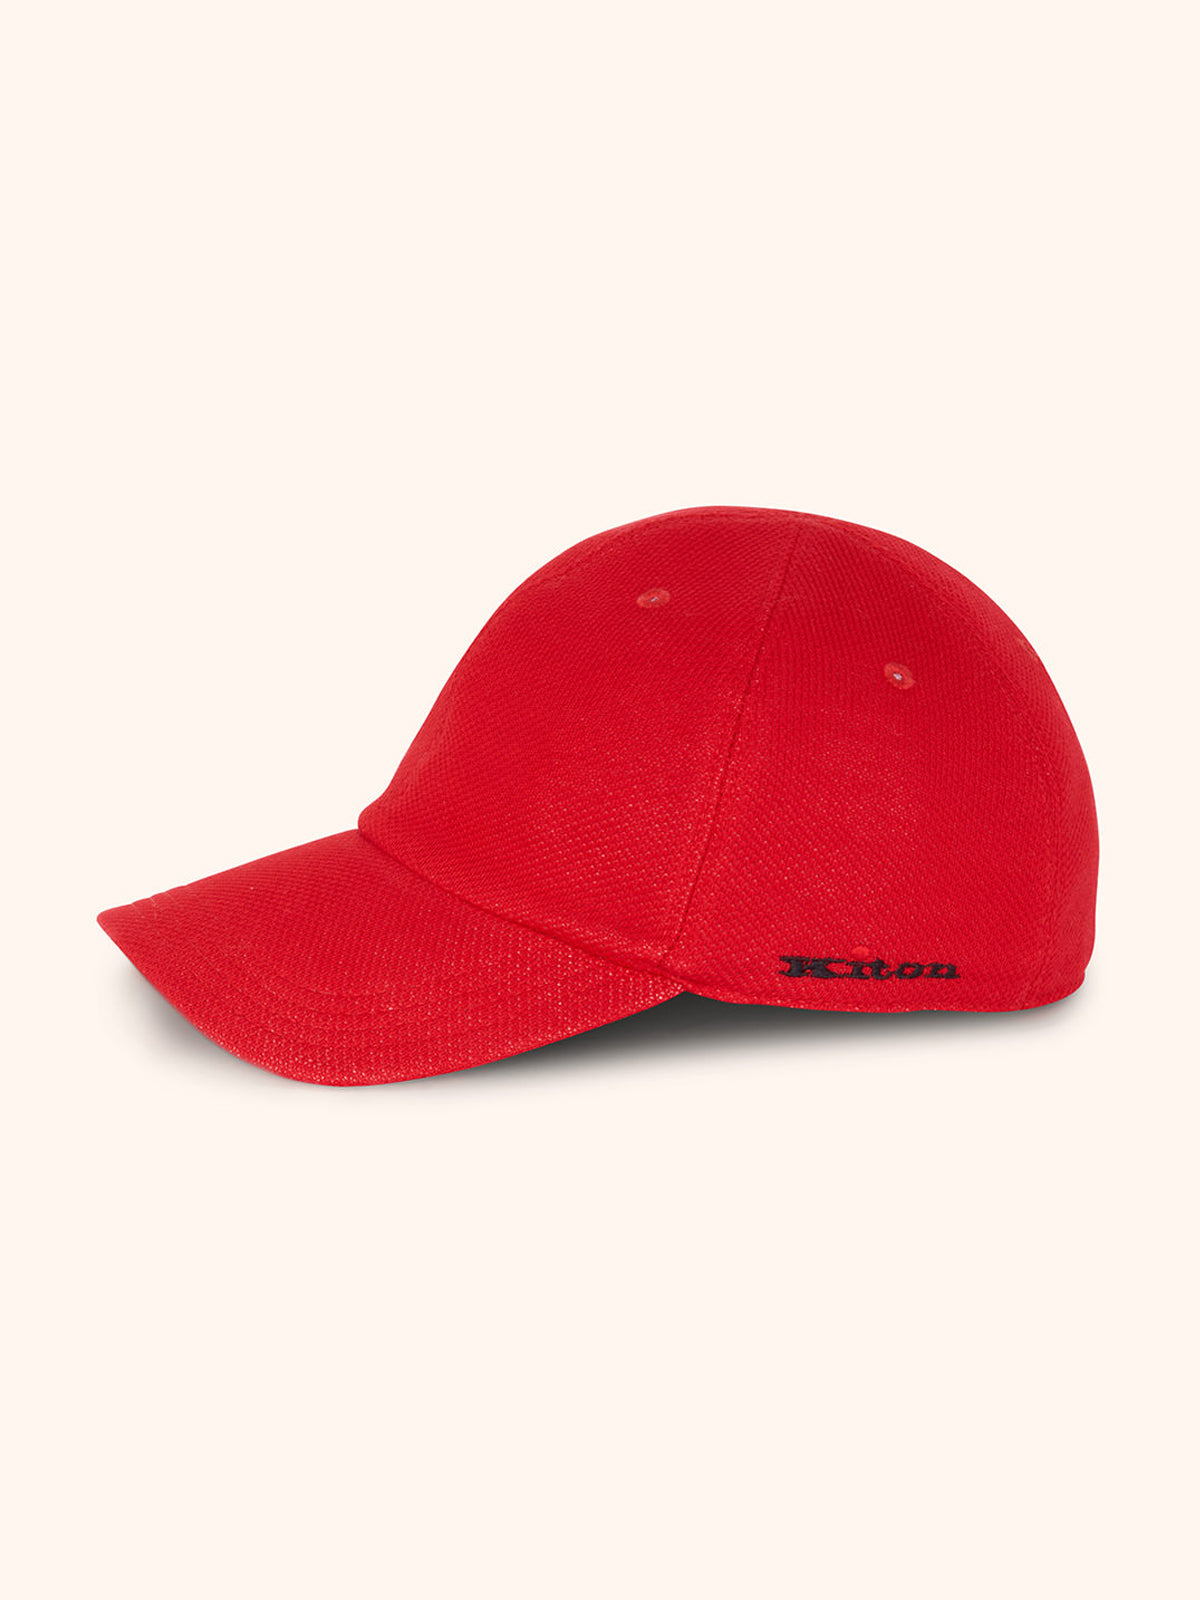 Red Europe for baseball – Kiton cotton hat man, in